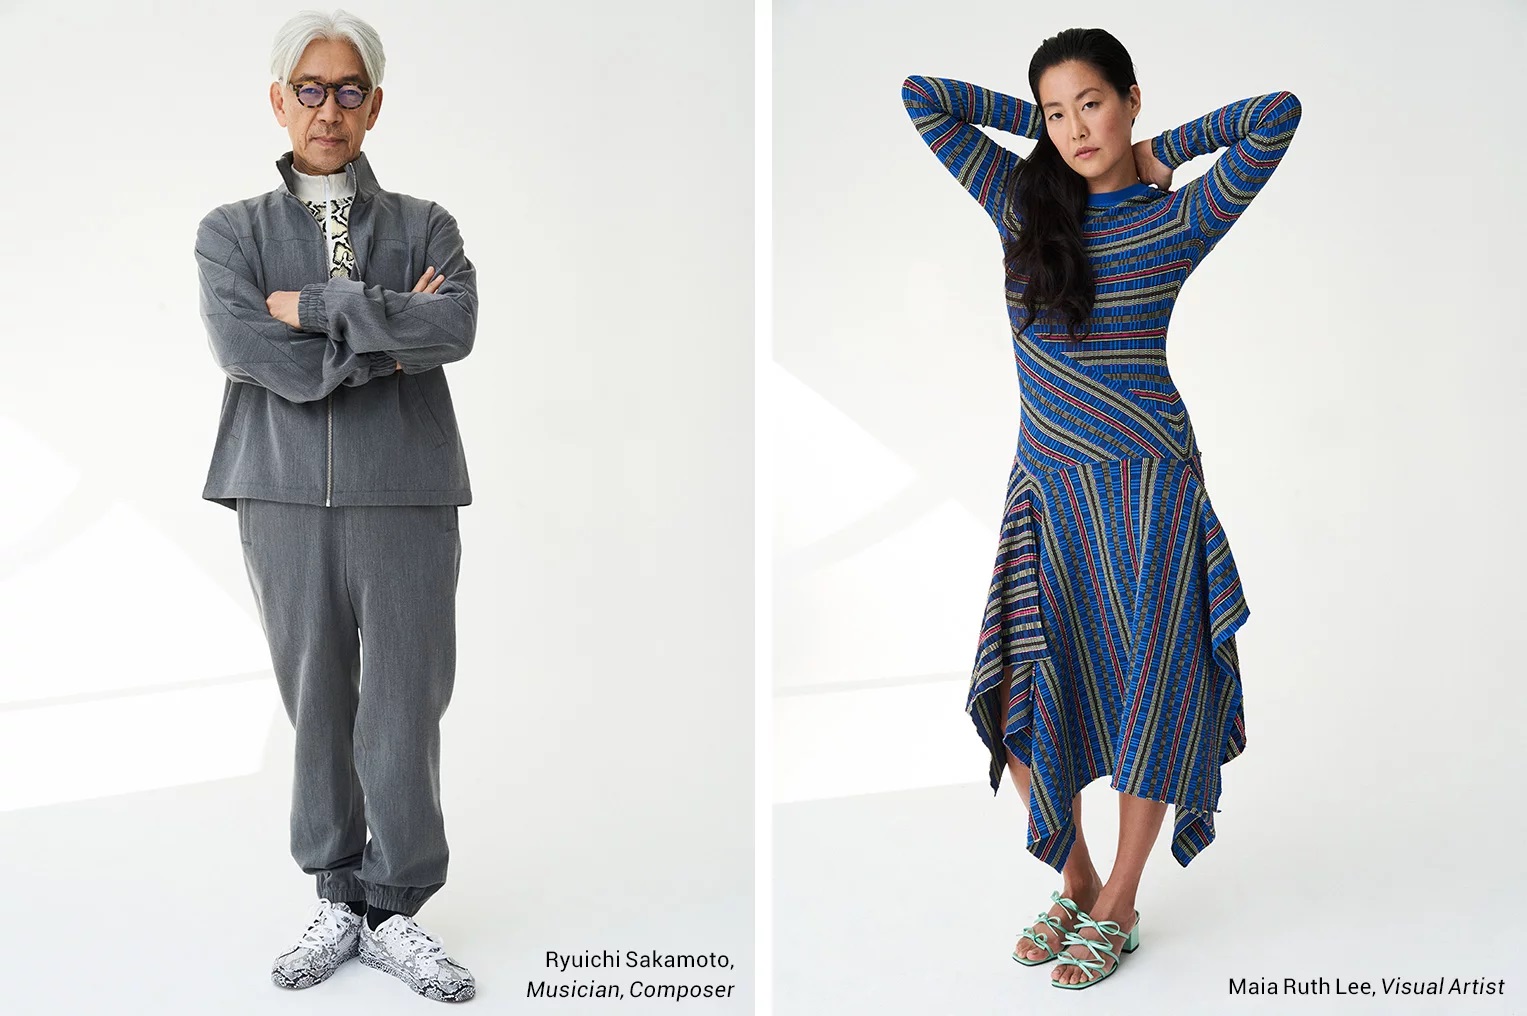 opening ceremony fall winter 2019 lookbook features an all-asian cast inspired by hong kong icons anita mui and leslie cheung - 02.jpg